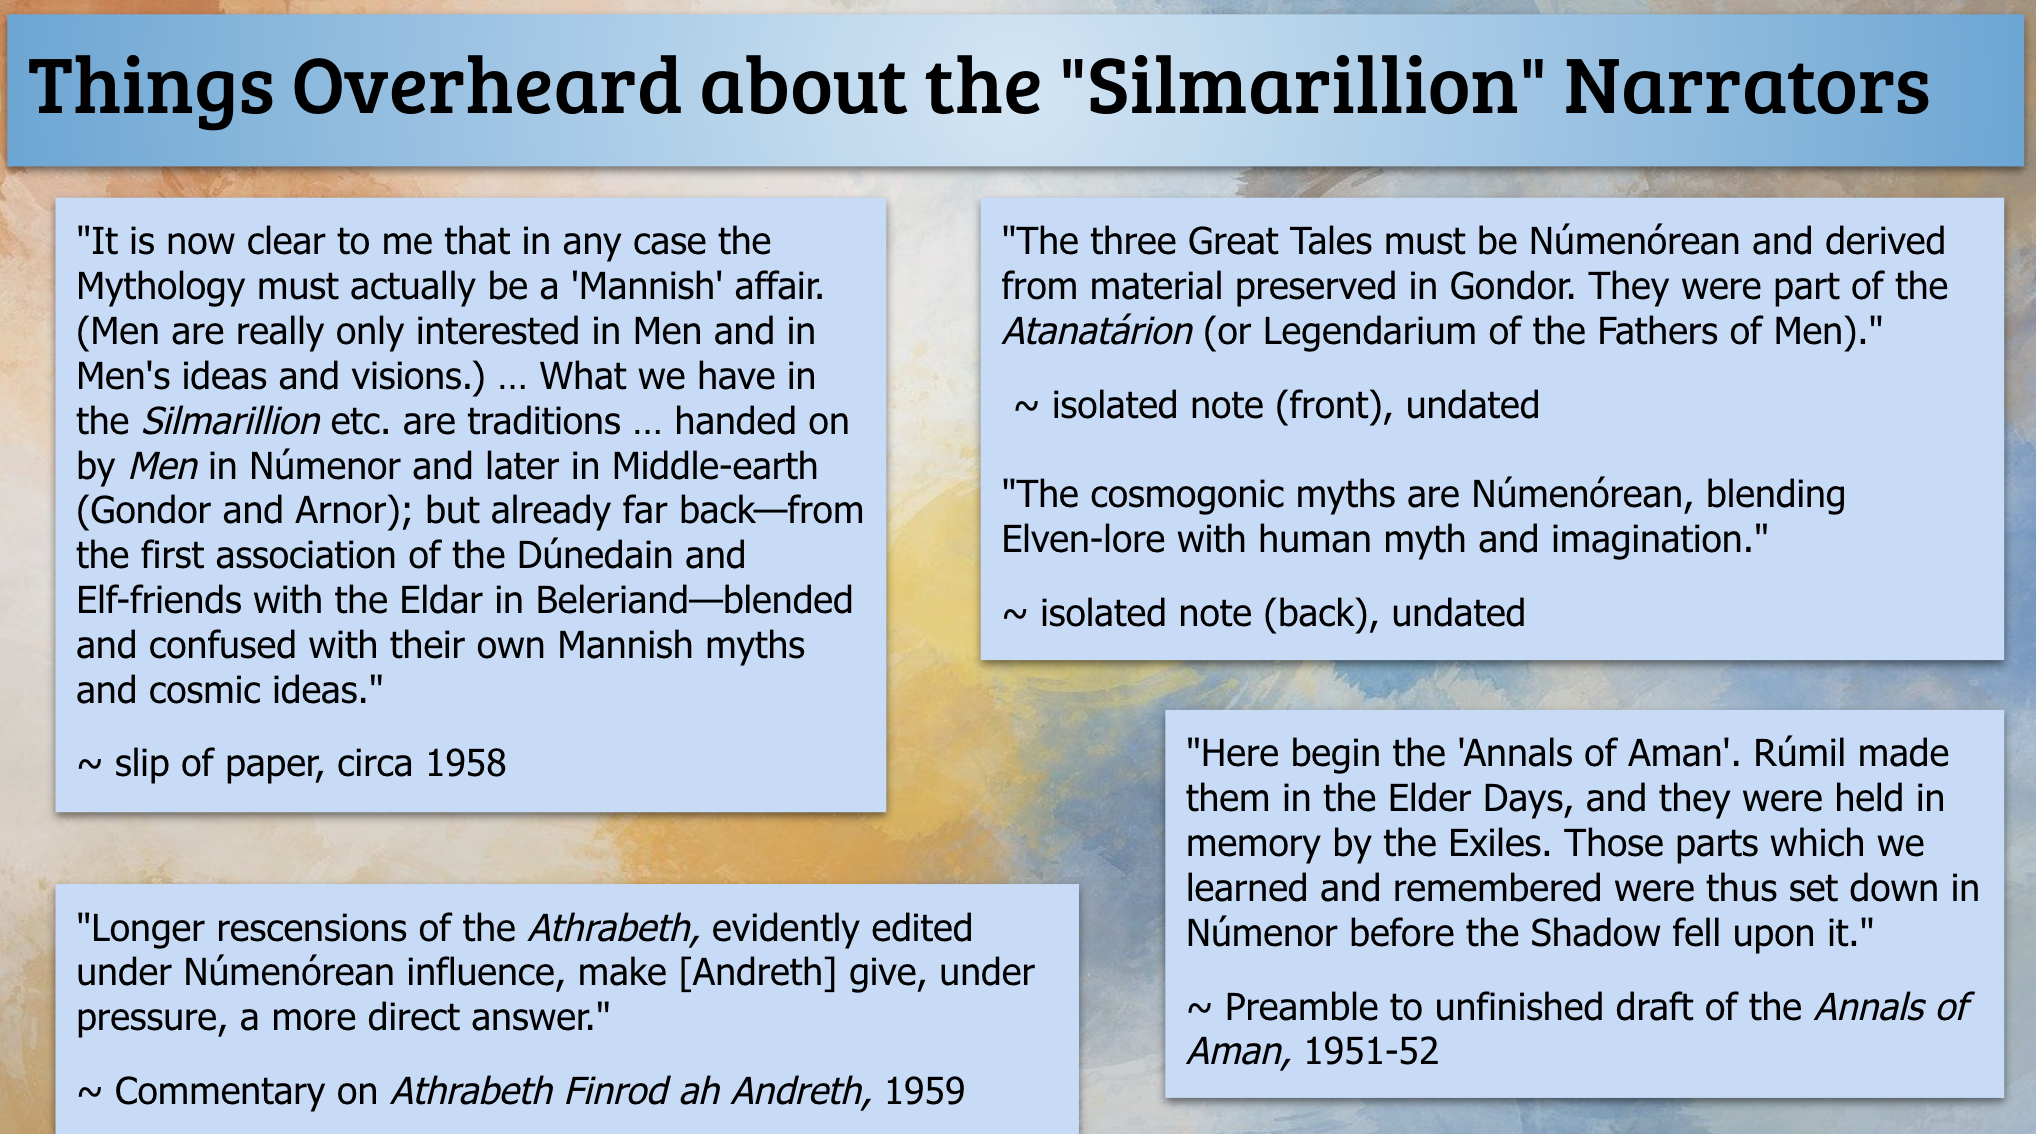 This slide includes five quotes from Morgoth's Ring: Quote 1: 'It is now clear to me that in any case the Mythology must actually be a 'Mannish' affair. (Men are really only interested in Men and in Men's ideas and visions.) … What we have in the Silmarillion etc. are traditions … handed on by Men in Númenor and later in Middle-earth (Gondor and Arnor); but already far back—from the first association of the Dúnedain and Elf-friends with the Eldar in Beleriand—blended and confused with their own Mannish myths and cosmic ideas.' Slip of paper, circa 1958. Quote 2: 'The three Great Tales must be Númenórean and derived from material preserved in Gondor. They were part of the Atanatárion (or Legendarium of the Fathers of Men).' Isolated note (front), undated. And, 'The cosmogonic myths are Númenórean, blending Elven-lore with human myth and imagination,' Isolated note (back), undated. Quote 3: 'Here begin the 'Annals of Aman'. Rúmil made them in the Elder Days, and they were held in memory by the Exiles. Those parts which we learned and remembered were thus set down in Númenor before the Shadow fell upon it.' Preamble to unfinished draft of the Annals of Aman, 1951-52. Quote 4: 'Longer recensions of the Athrabeth, evidently edited under Númenórean influence, make [Andreth] give, under pressure, a more direct answer.' Commentary on Athrabeth Finrod ah Andreth, 1959.